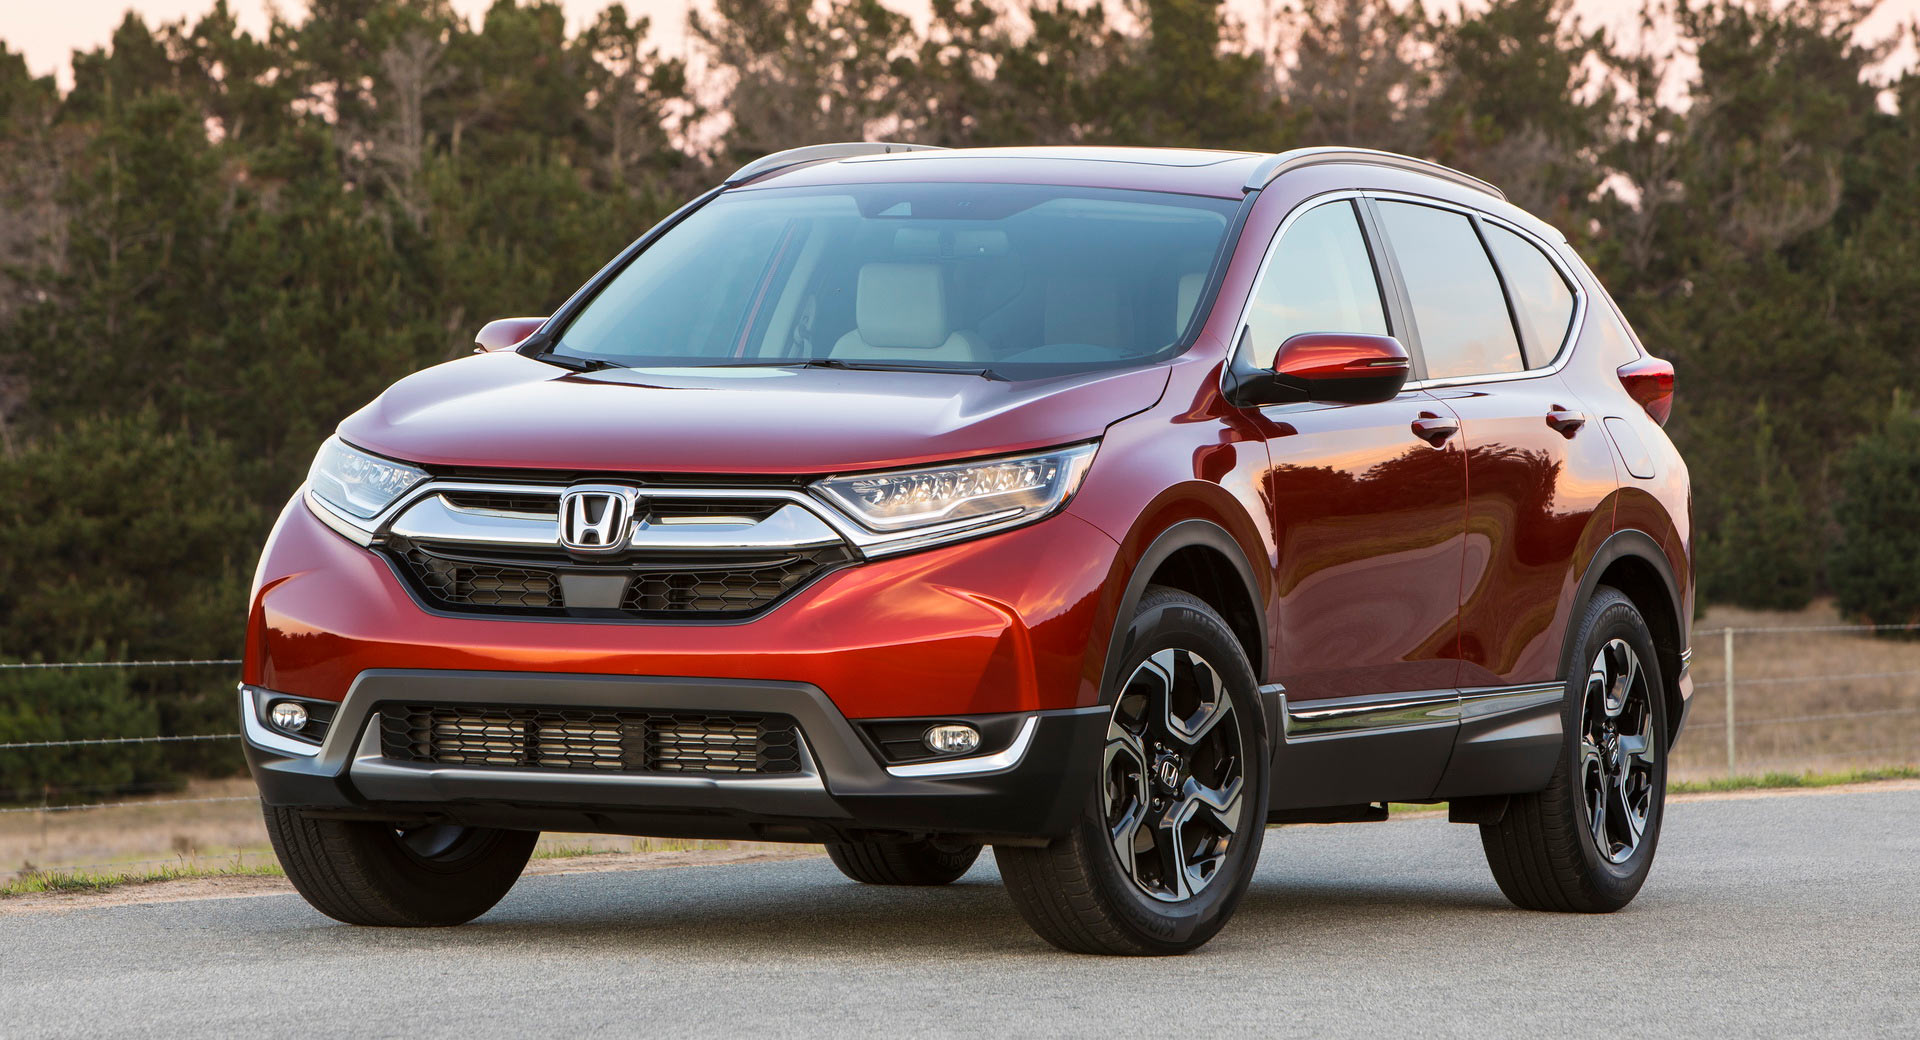 Honda Admits CR-V Engine Stalling Issue, Says It’s Working On A Fix Carscoo...